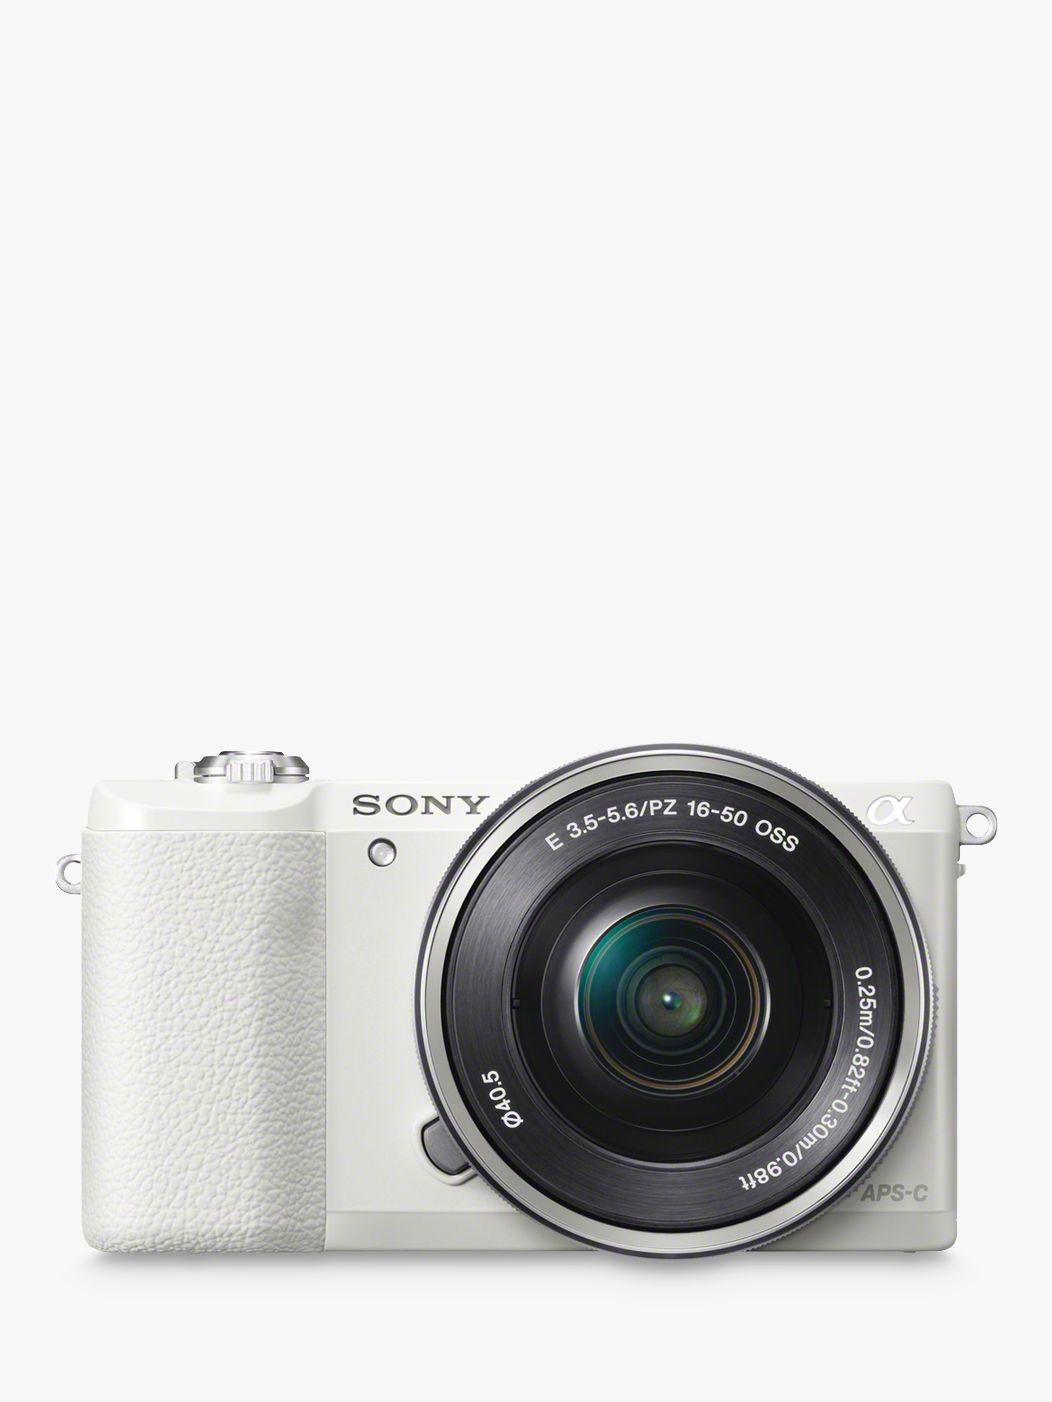 Sony A5100 Compact System Camera with 16-50mm OSS Lens, HD 1080p, 24.3MP, Wi-Fi, NFC, OLED, 3 Tilting Touch Screen